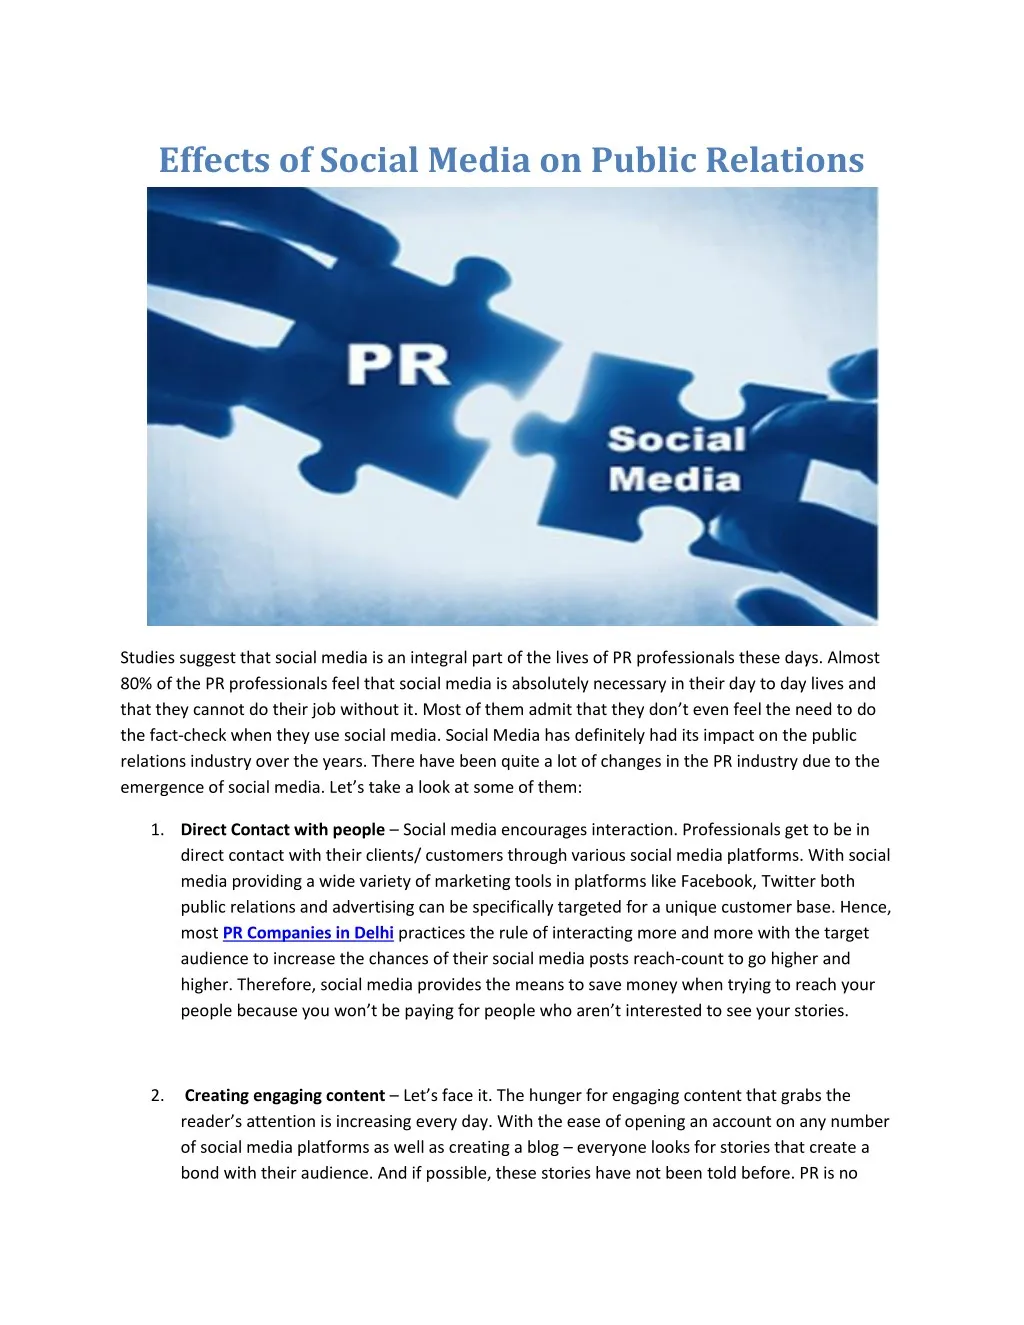 impact of social media on public relations